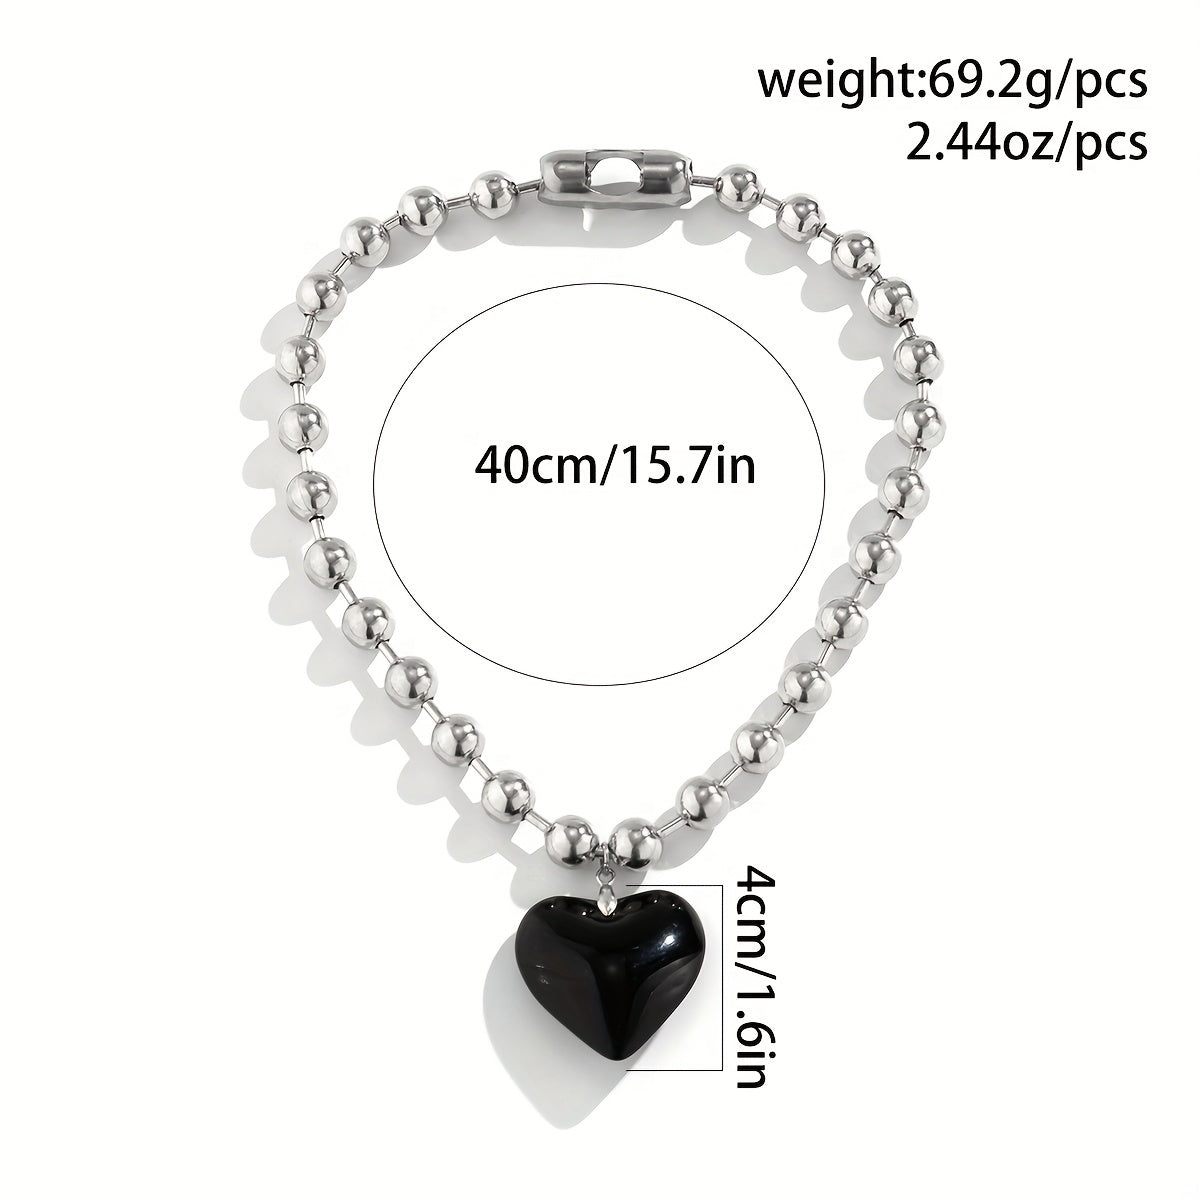 Gorgeous Silvery Round Bead Chain Love Pendant Necklace - Perfect Gift for Women and Girls!